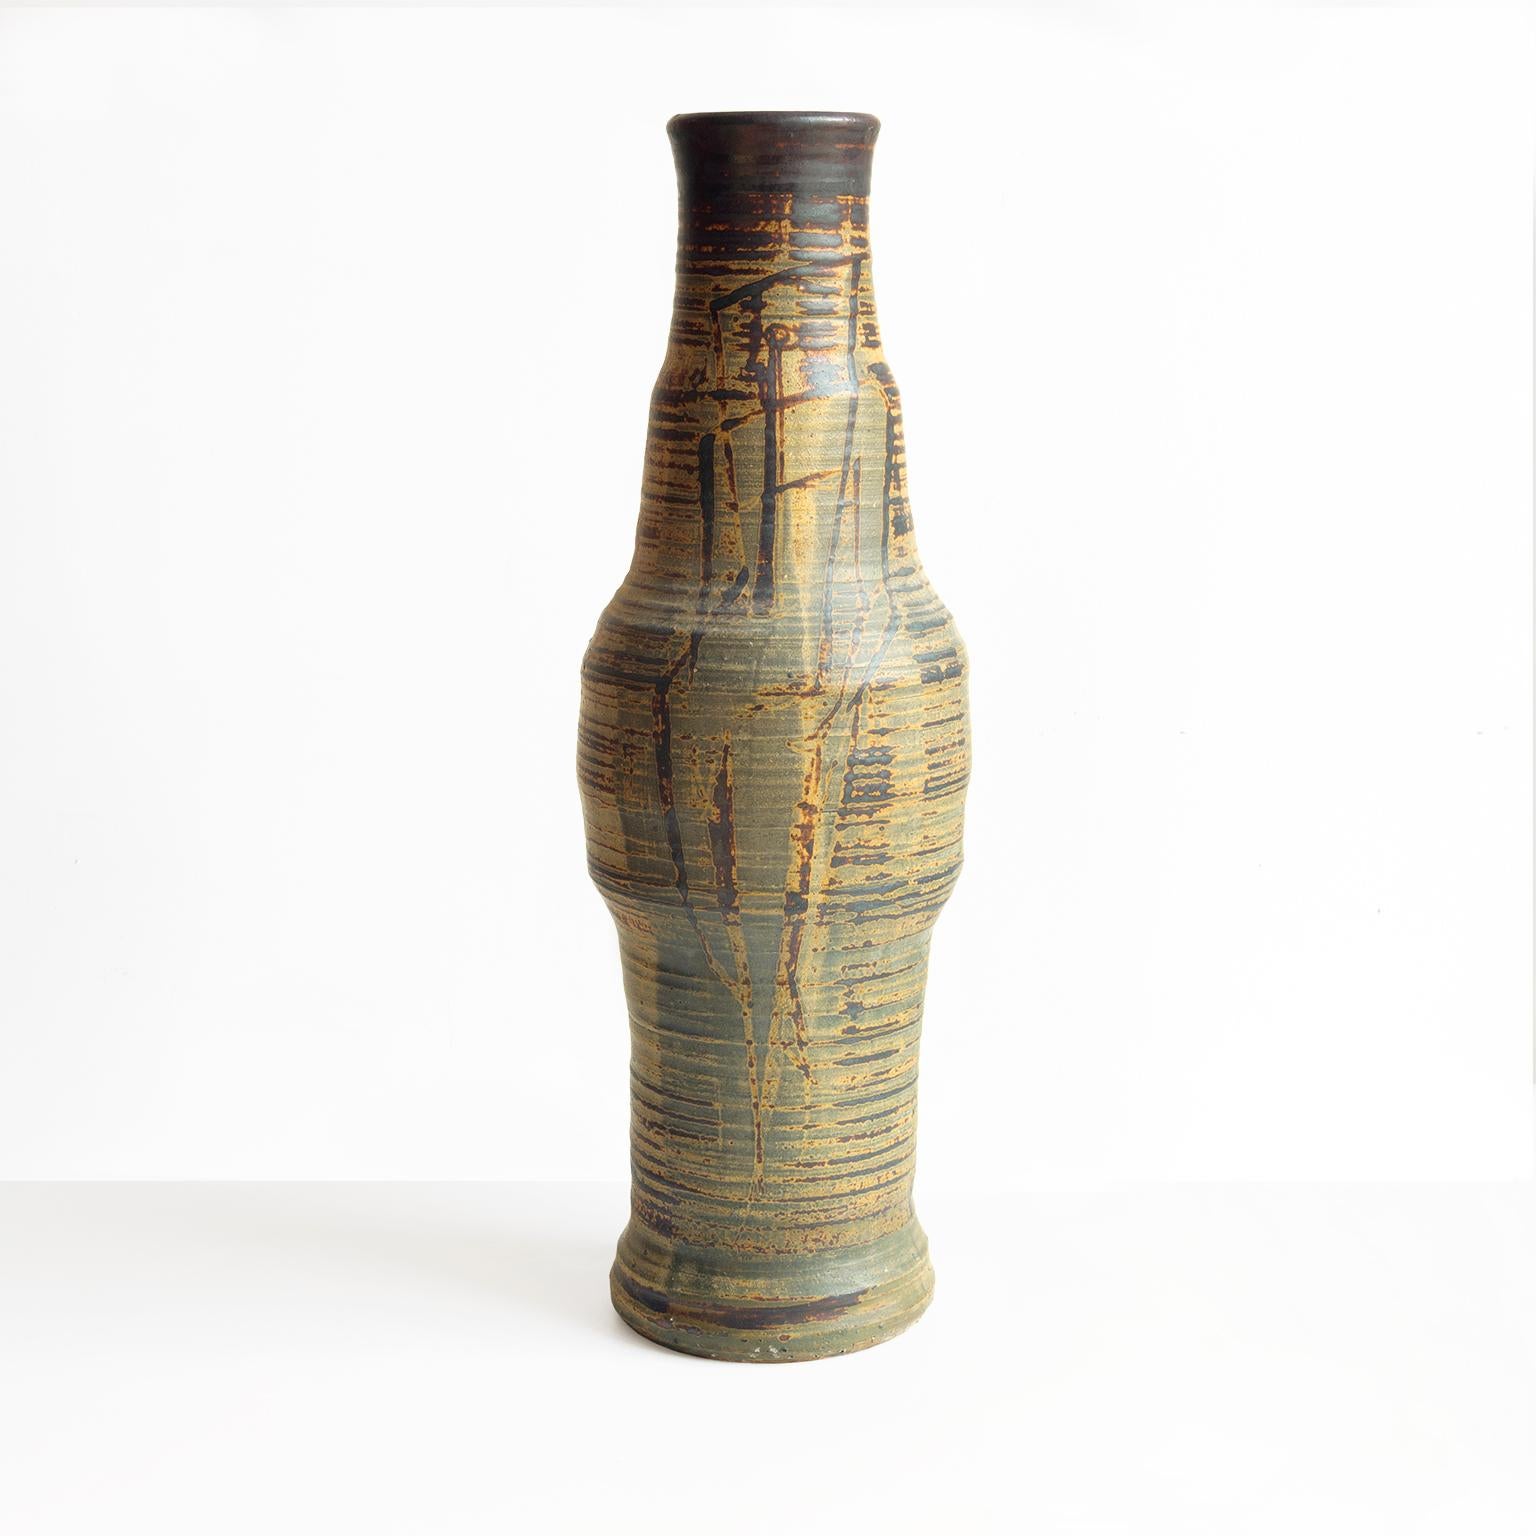 Robert Johnson Washington (1913-1997), stoneware vessel with tapering form decorated with two female figures. Finished with an iron oxide or manganese glaze, impressed monogram, signed, RJW 66’ glazed 82”.

Measures: Height: 21.75“, Diameter: